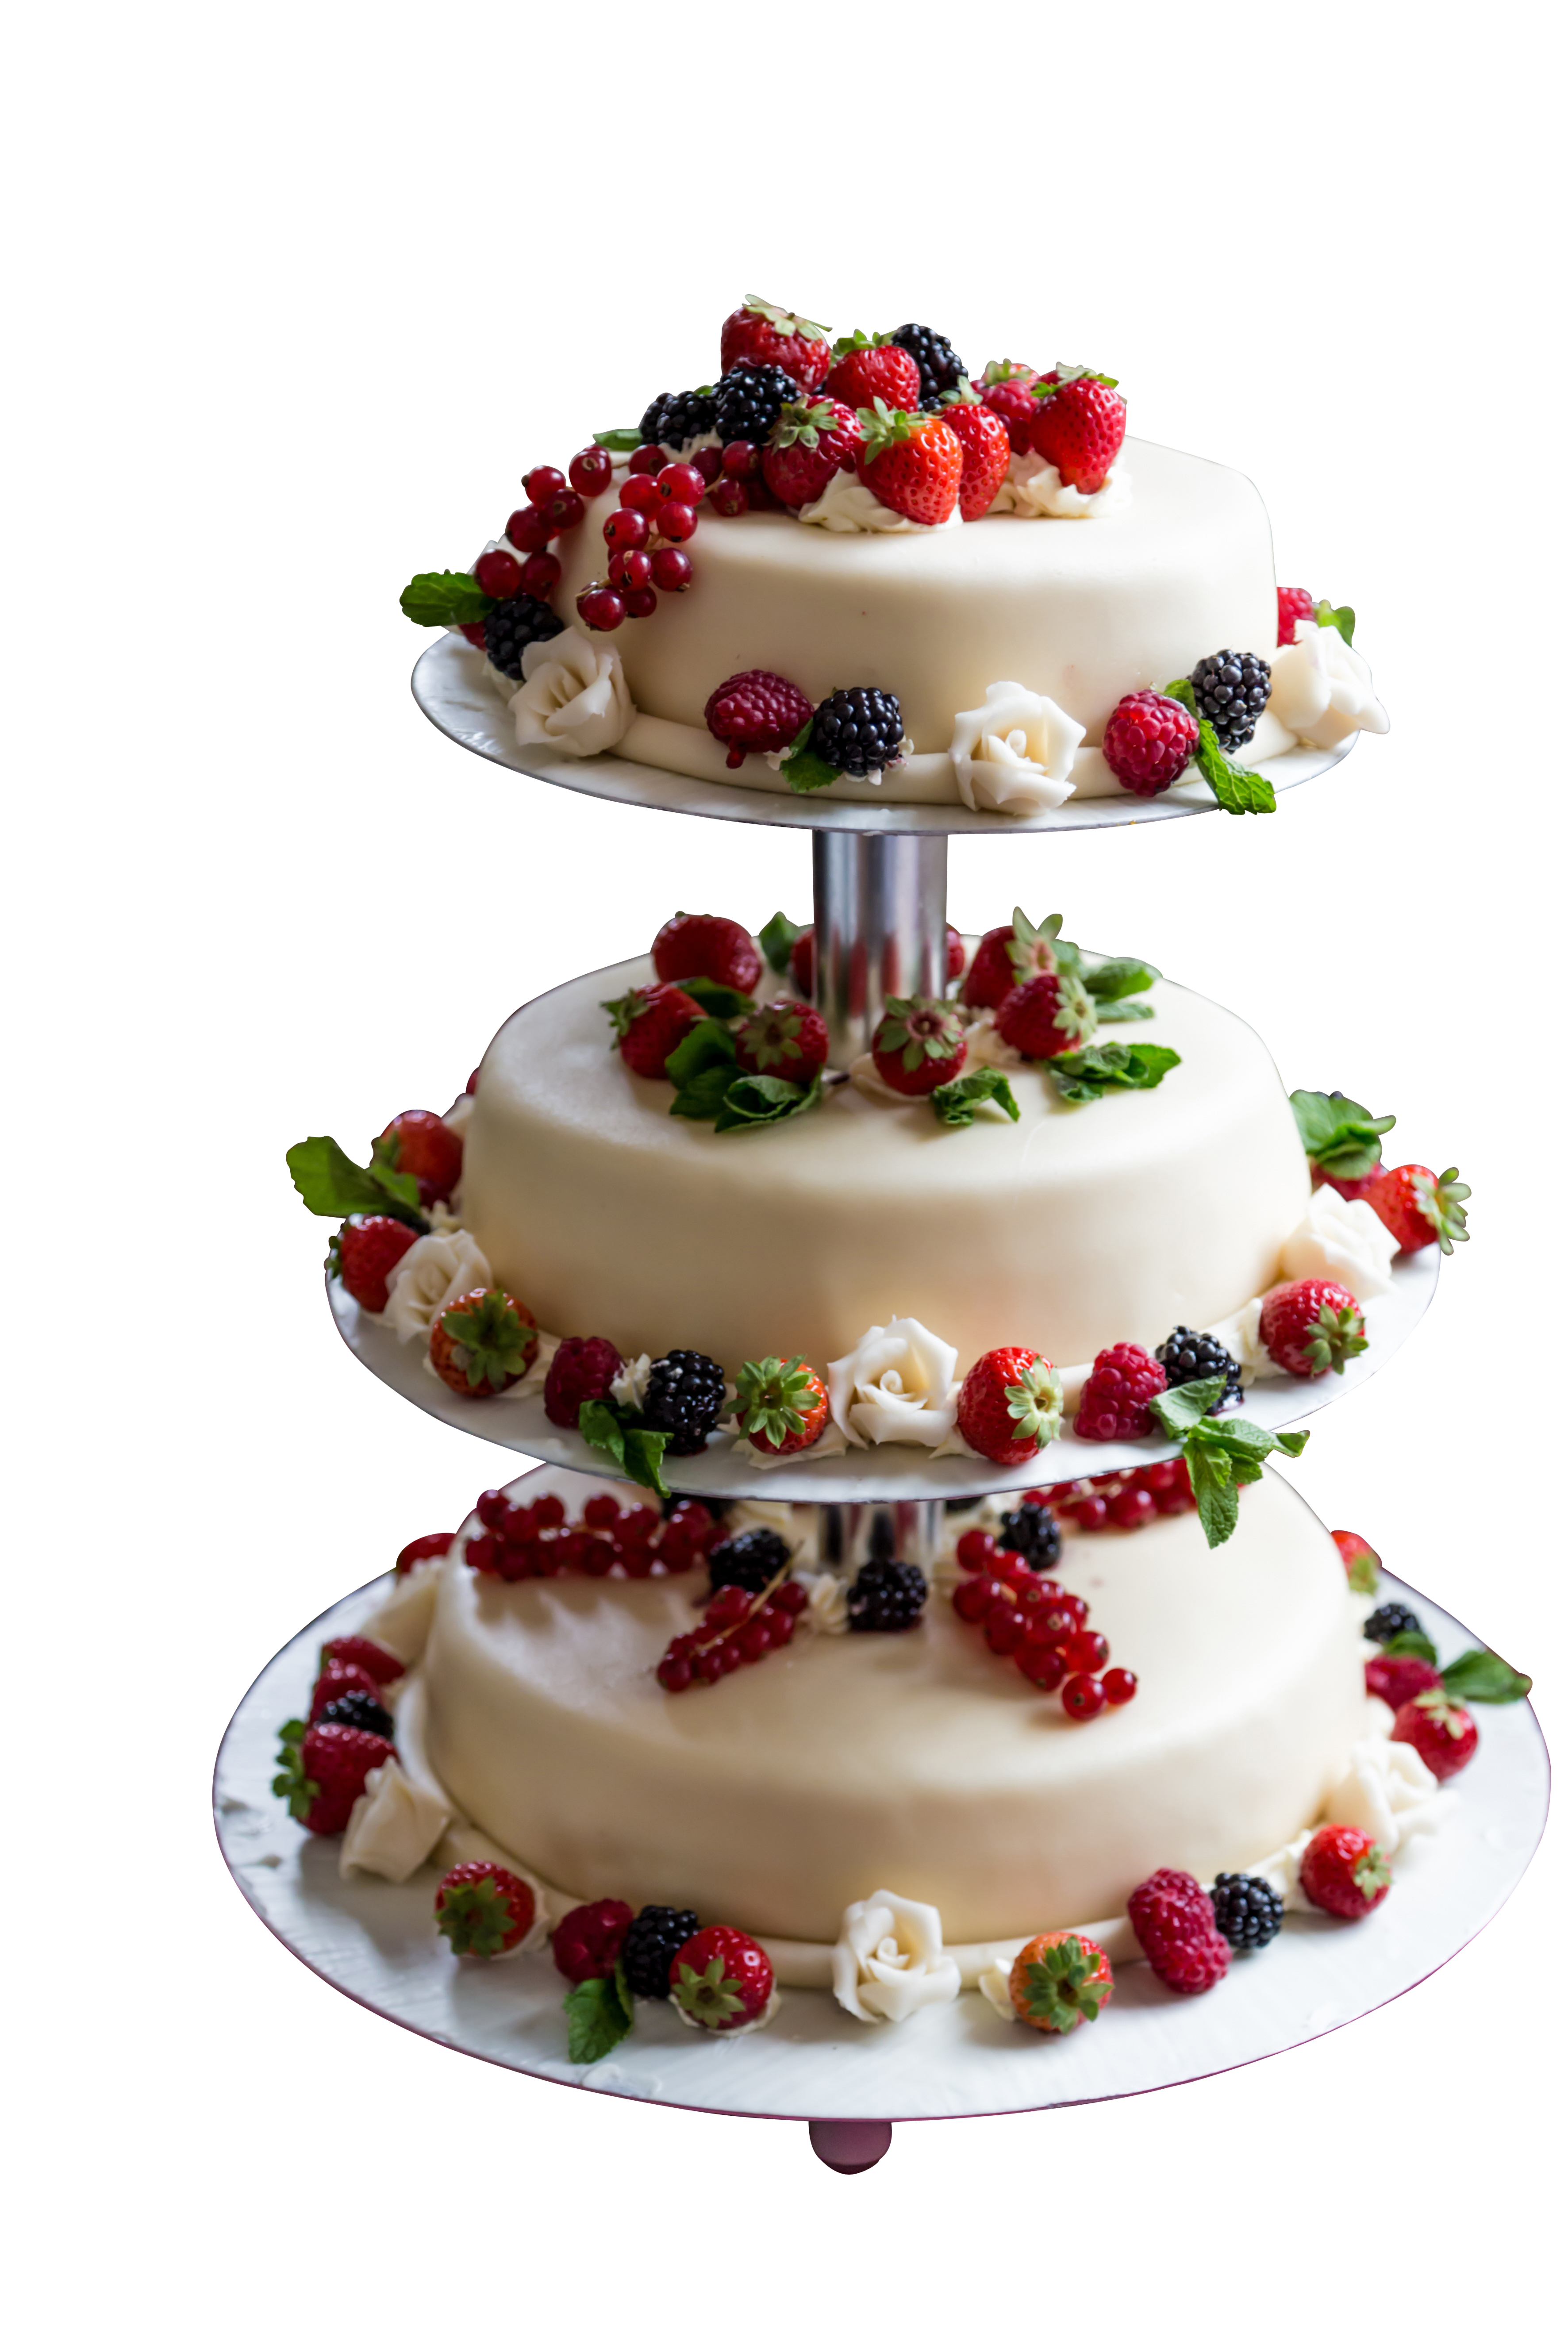 A Cake With Berries On Top